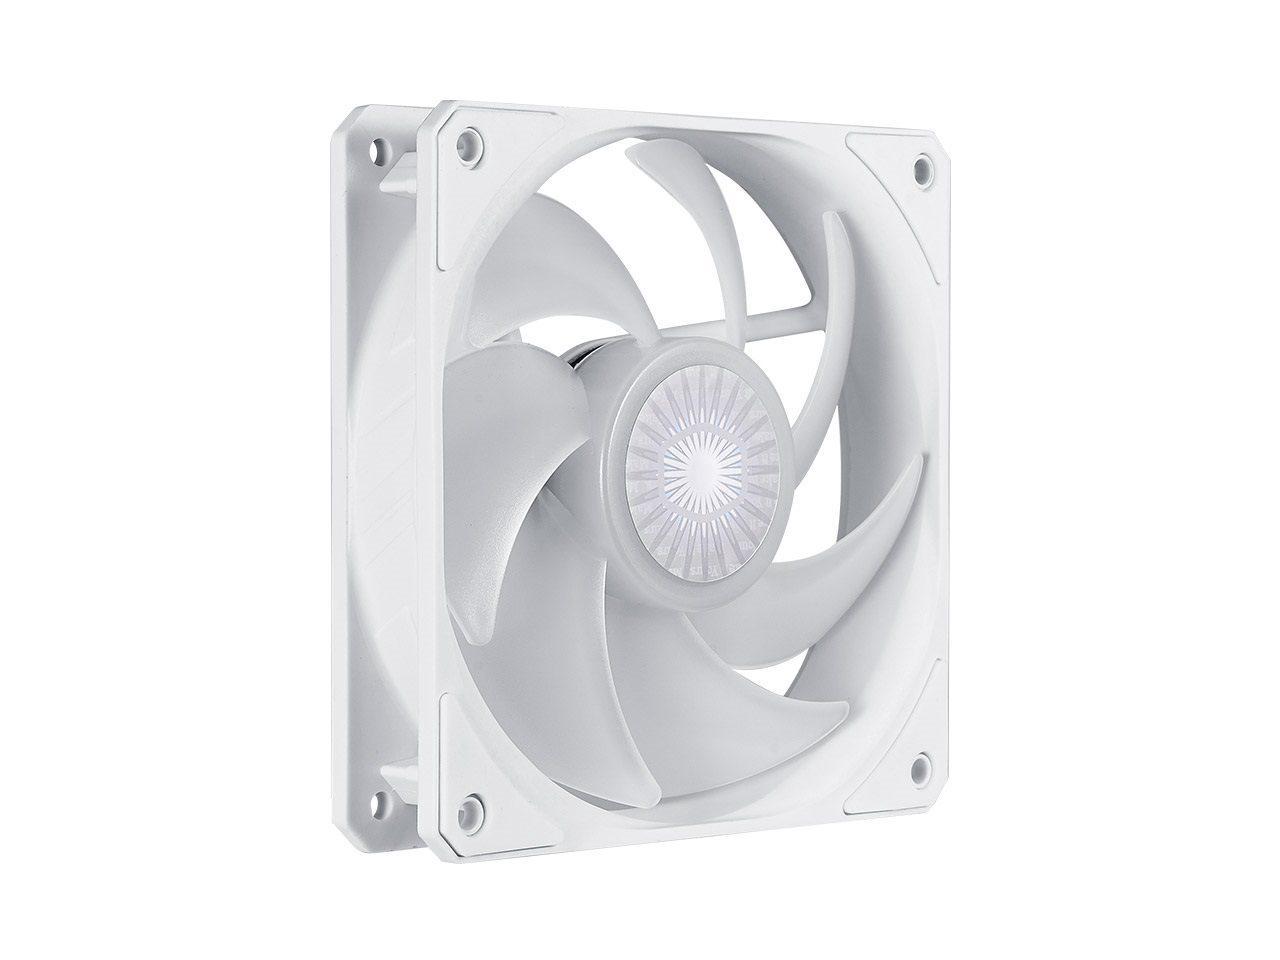 Cooler Master SickleFlow 120 V2 Addressable RGB Fan (White Edition, 3 in 1 with ARGB LED Controller) - 120mm Square Frame Fan, Air Balance Curve Blade Design, PWM Control for PC Case & Liquid Radiator